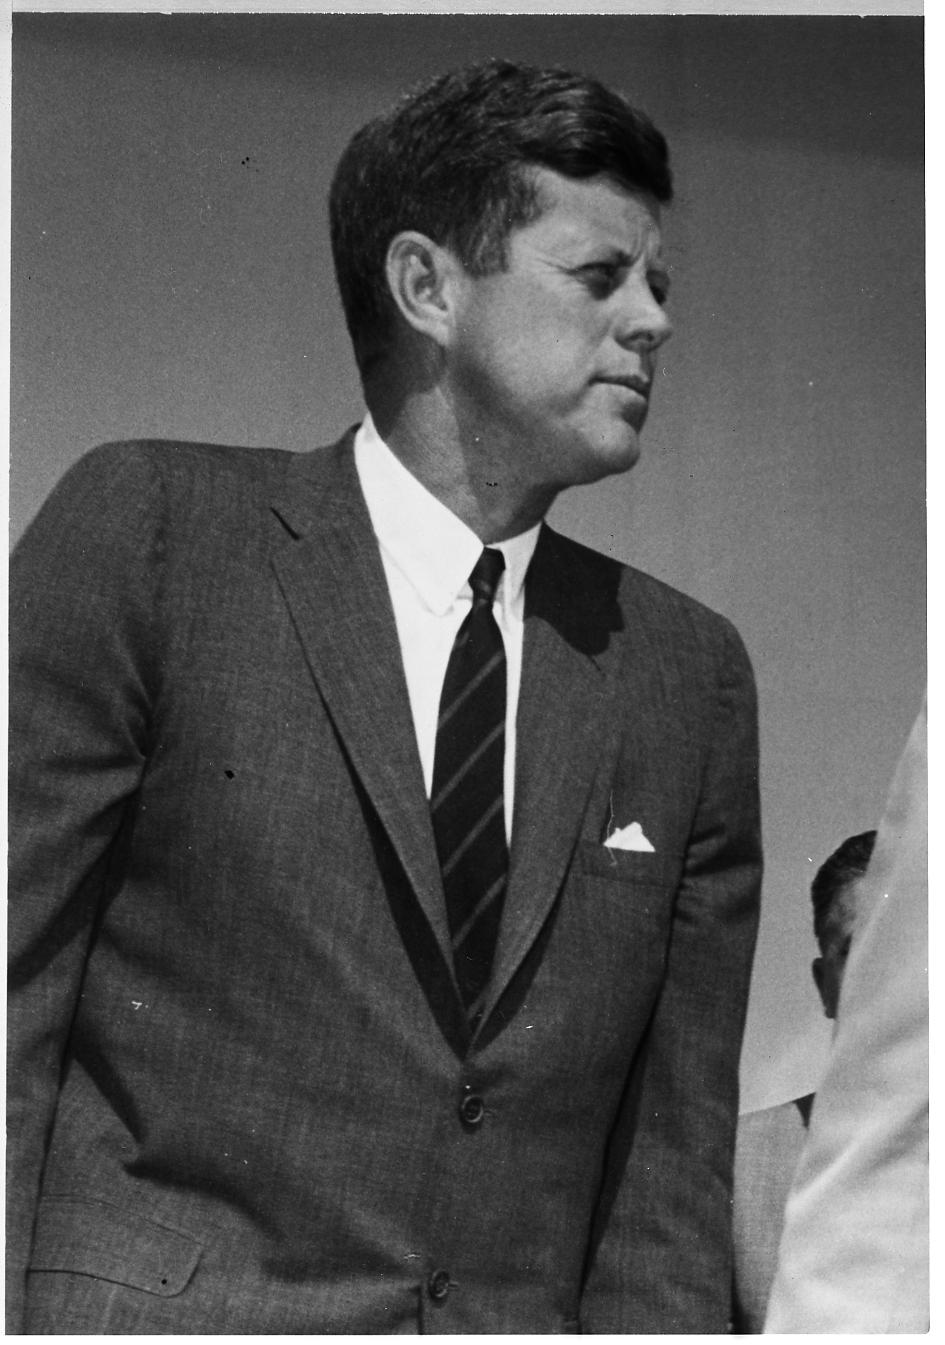 President Kennedy photographed in September 1962 (catalogue reference: DEFE 13/323